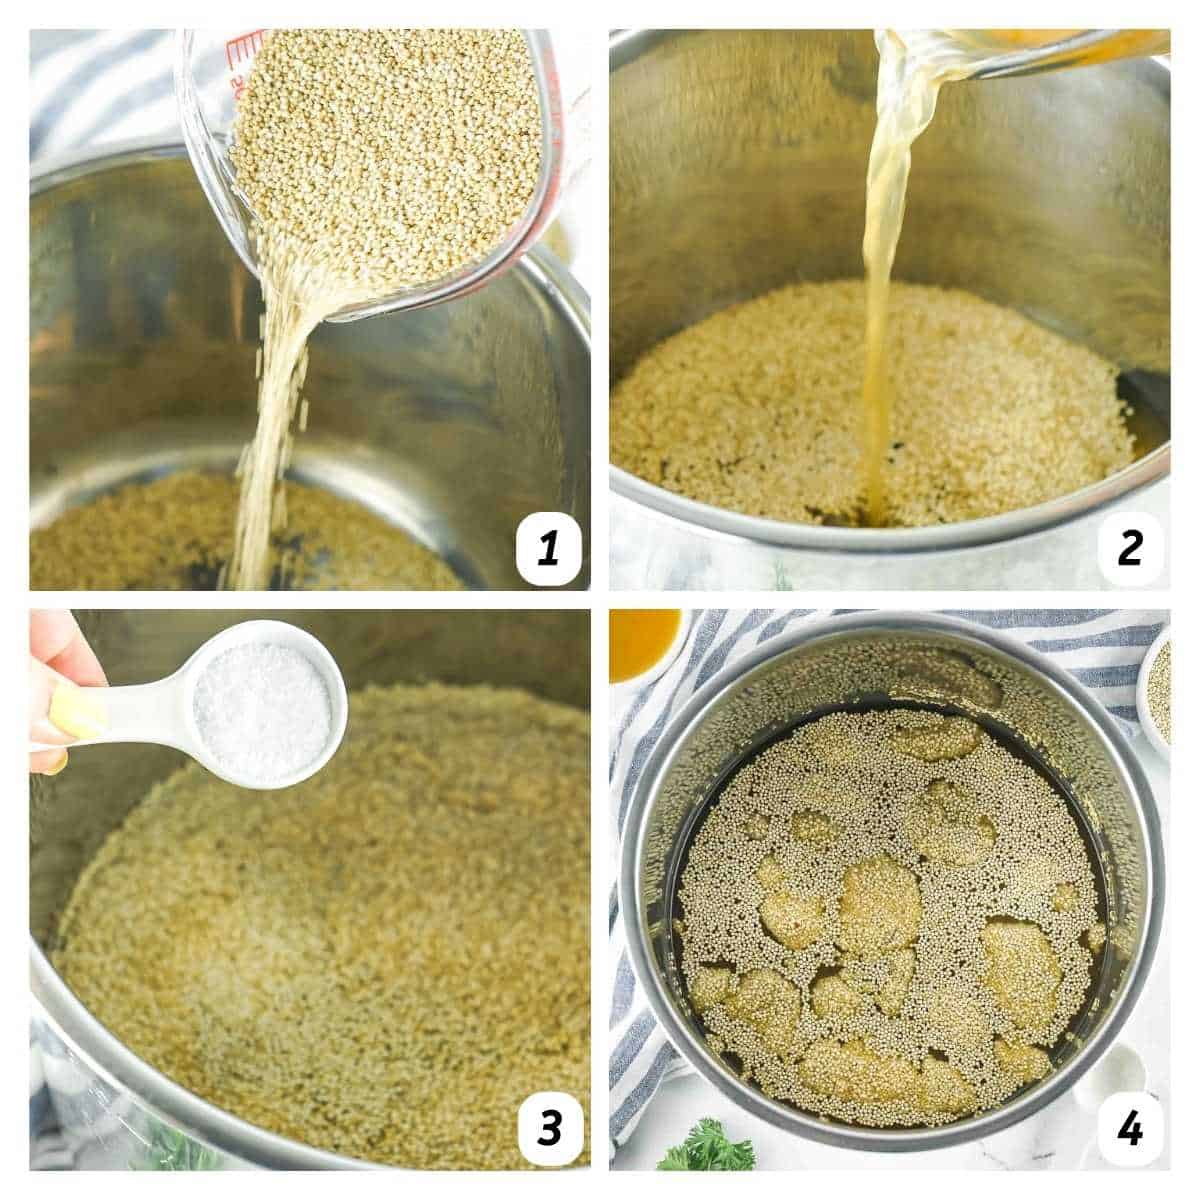 Four panel grid of process shots 1-4 - adding quinoa, salt, and chicken broth into the instant pot and cooking.